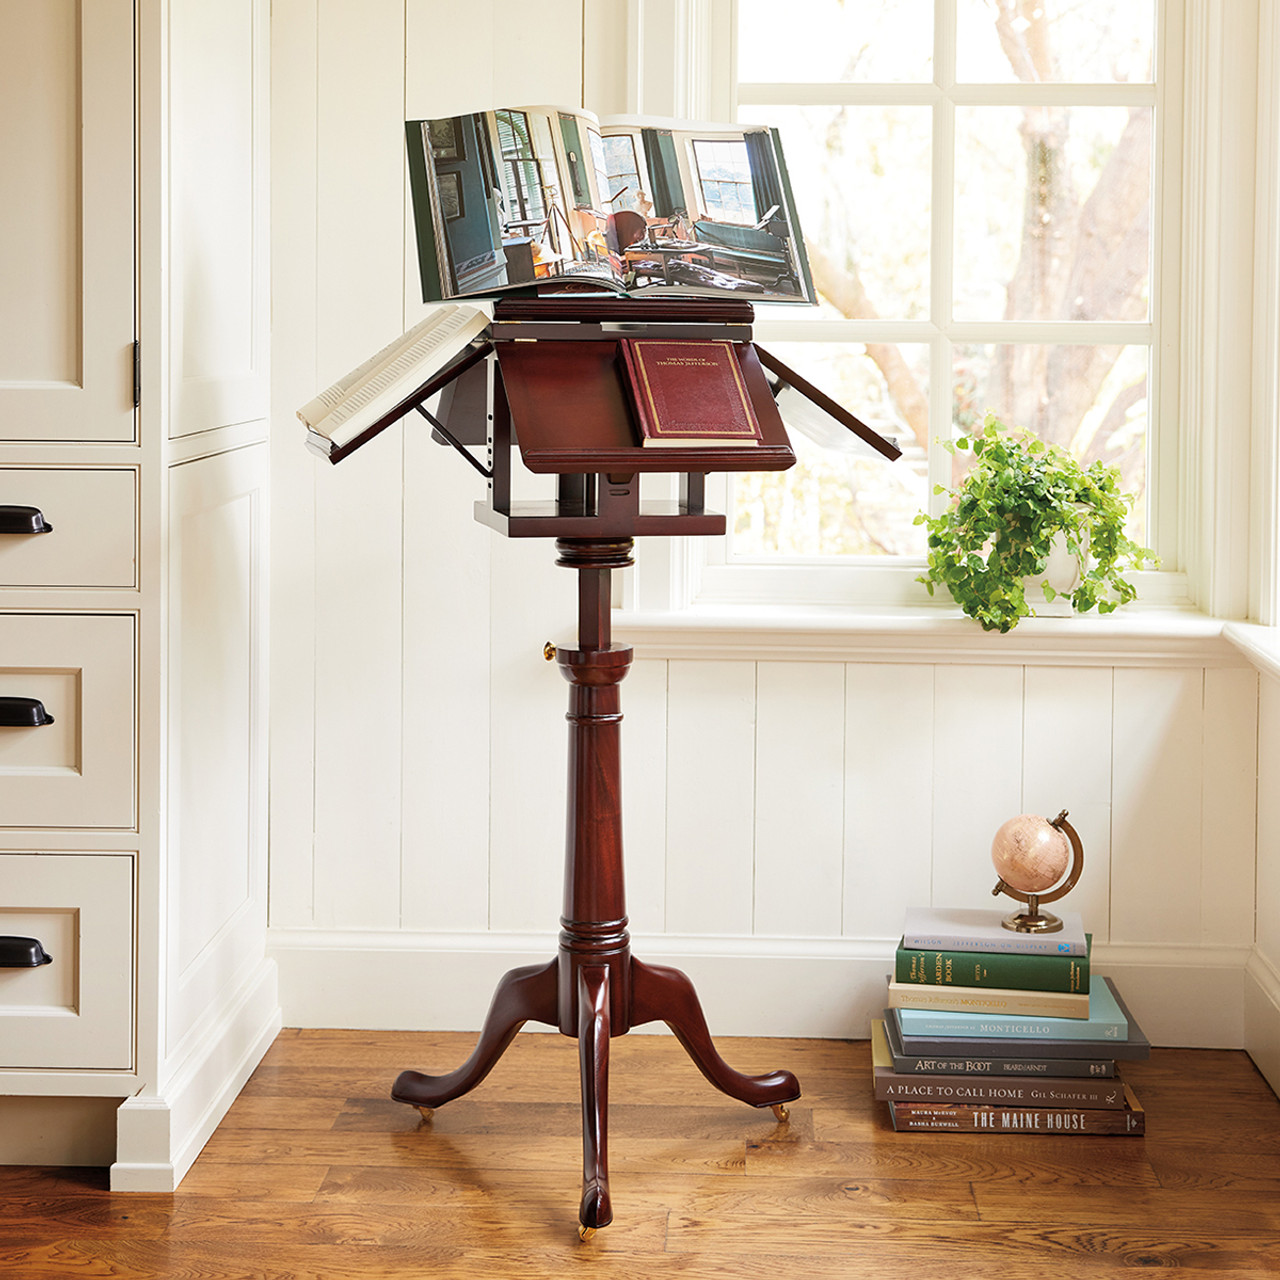 Monticello Floor Stand with Monticello Shop Coupon Code